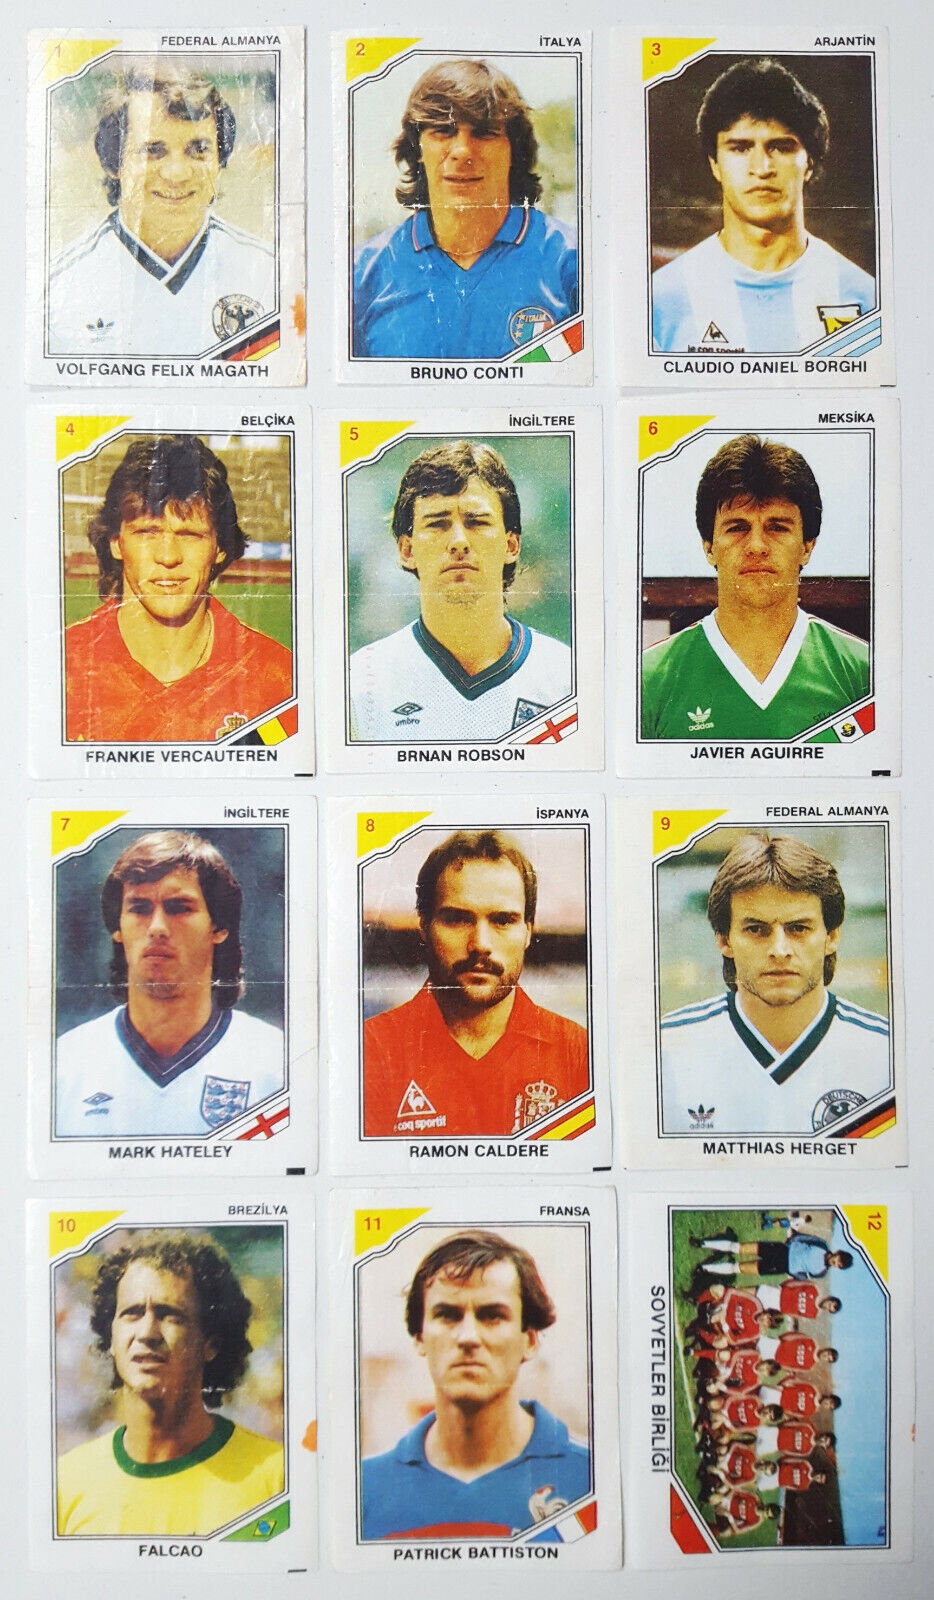 FINAL 86 Red 1-60 Complete Full SET Chewing GUM Wrappers Soccer Inserts Maradona